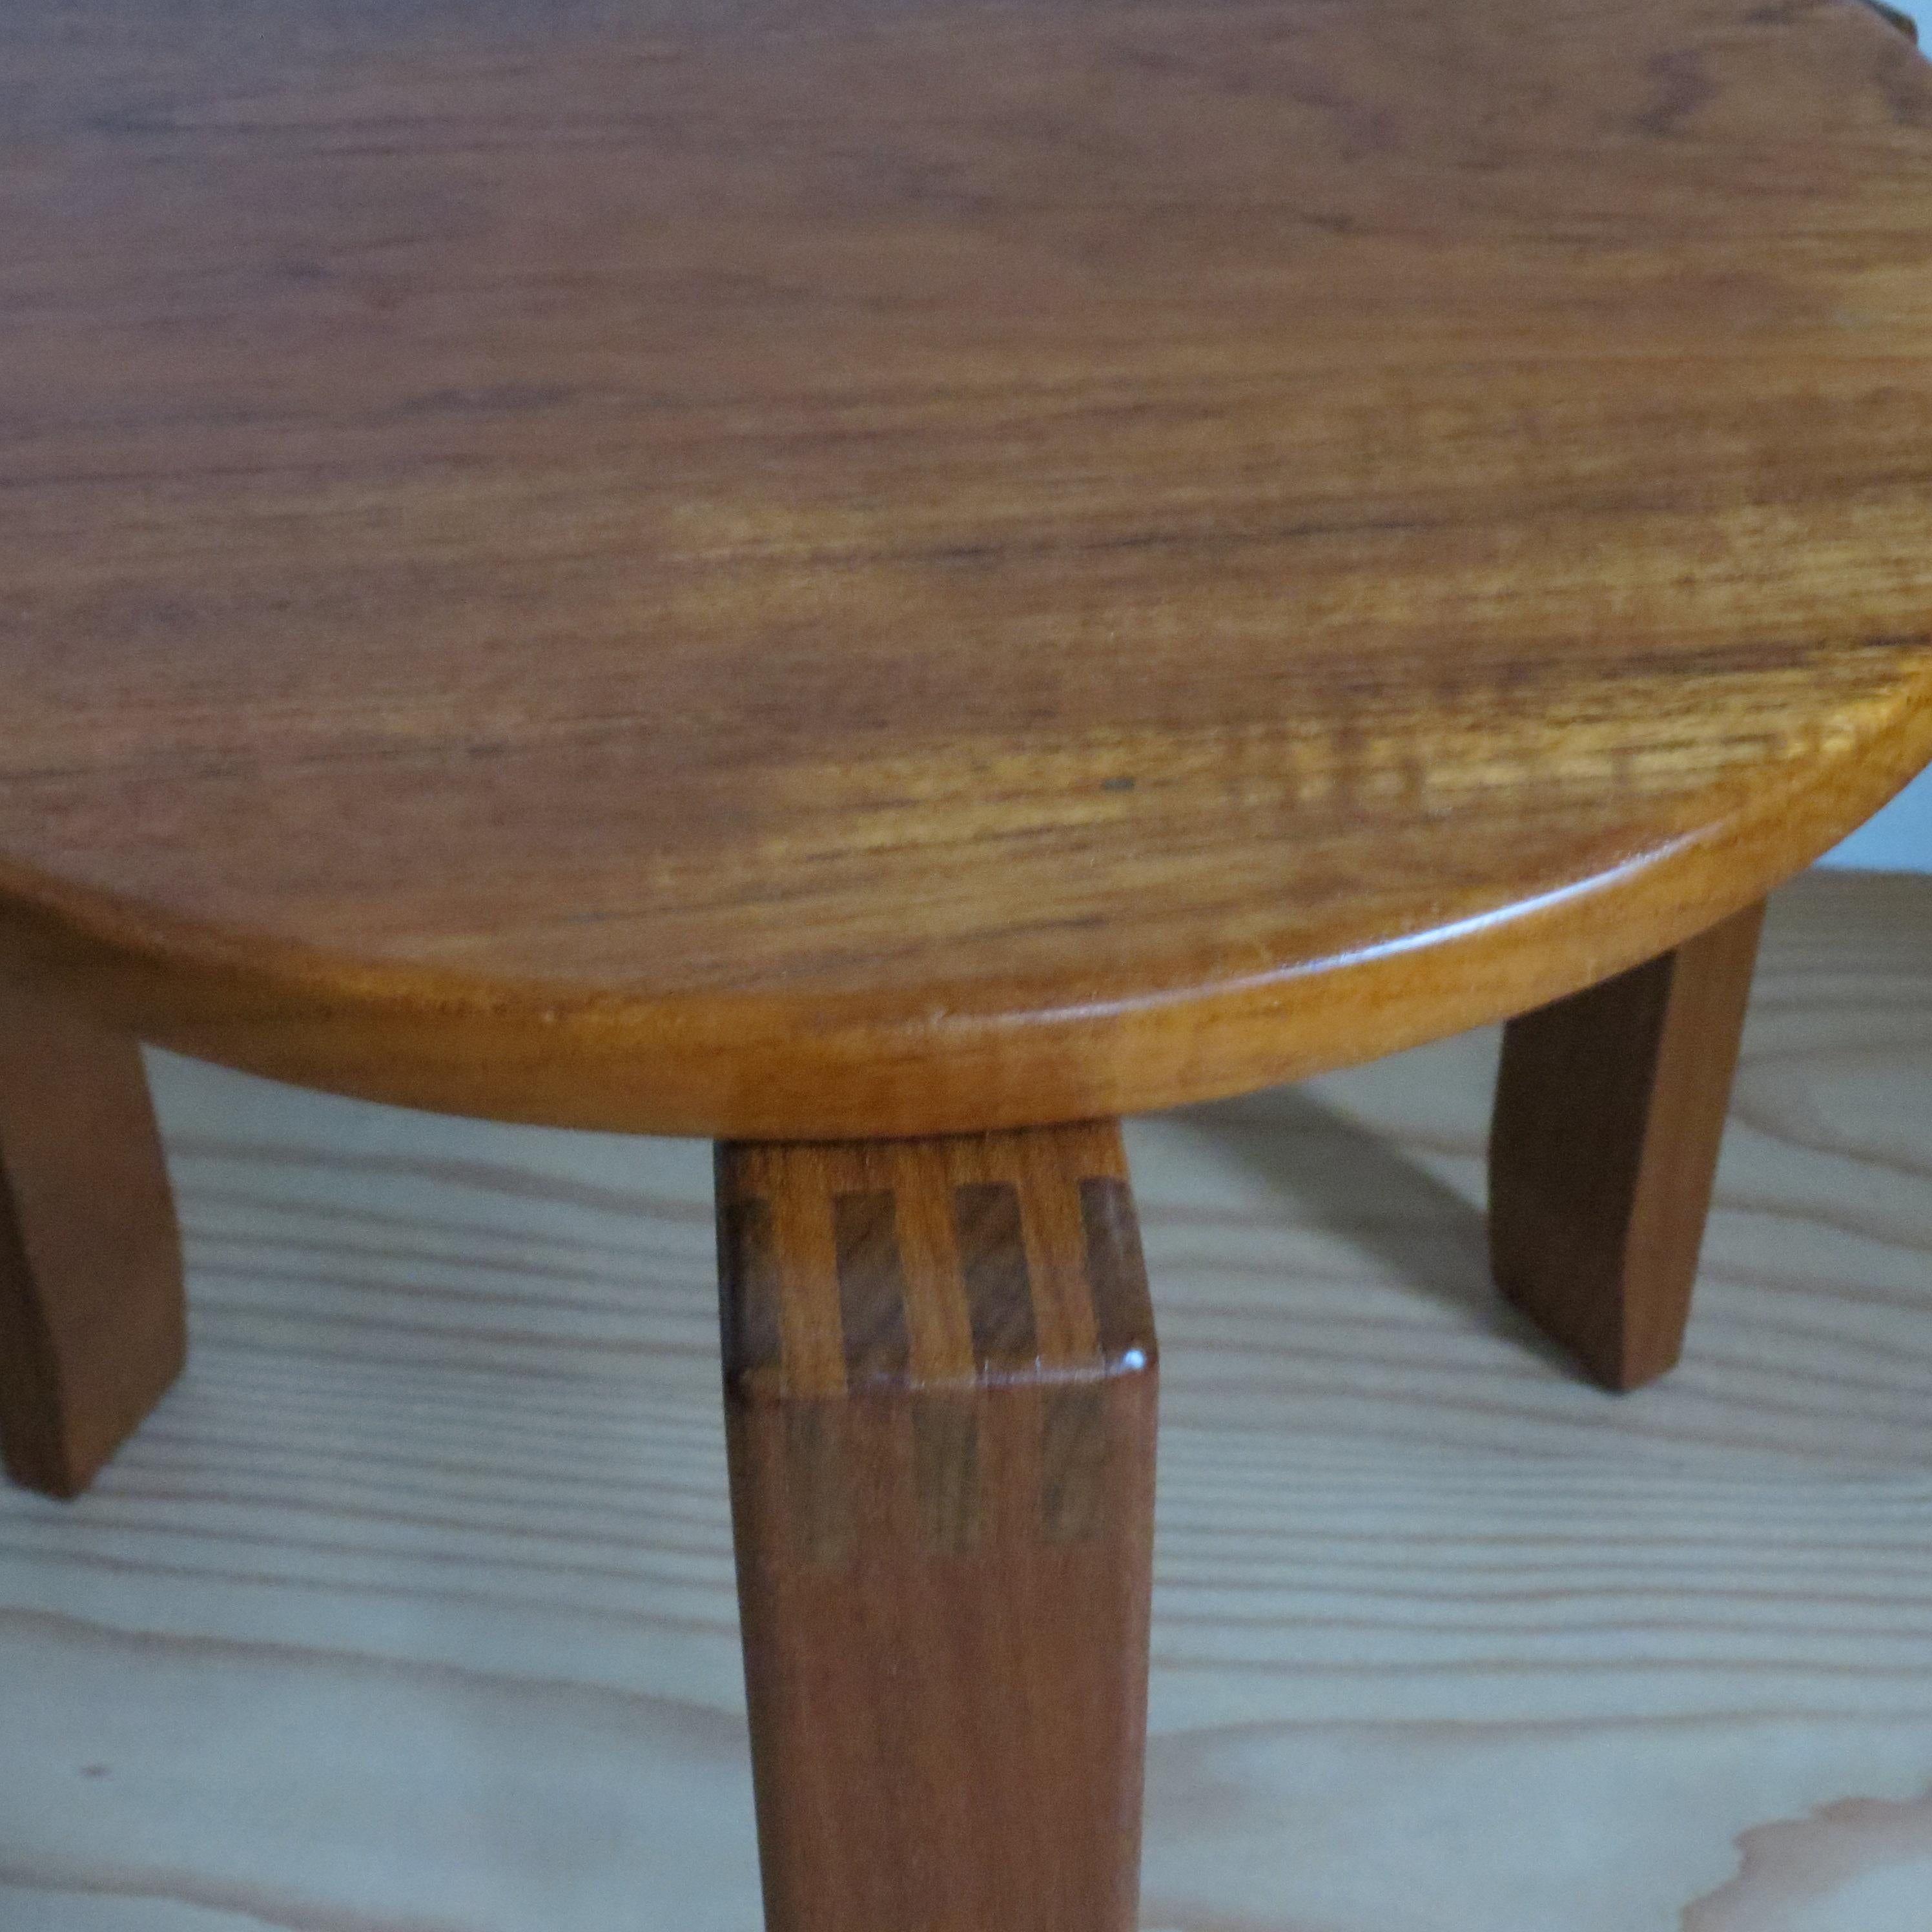 1960s Mid-century Small Circular Three Legged Table in Afromosia and Teak For Sale 2